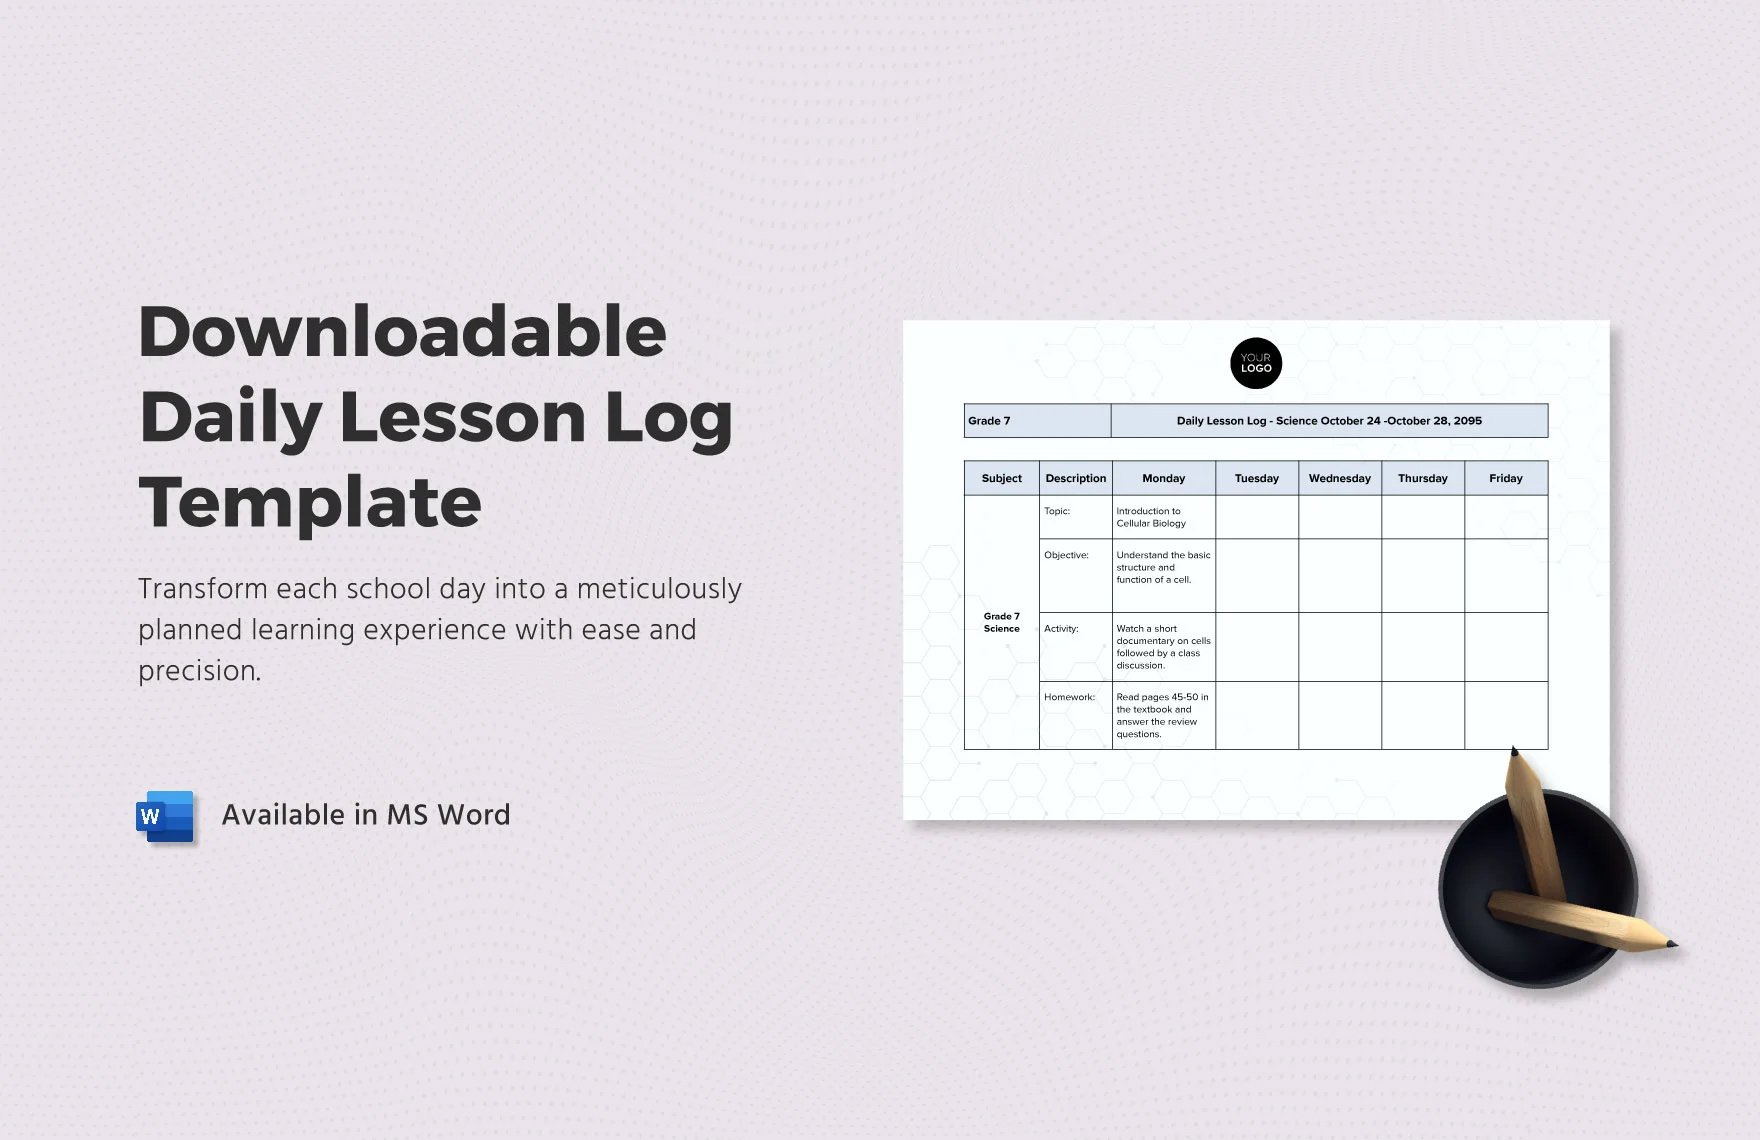 Free Downloadable Daily Lesson Log Template in Word